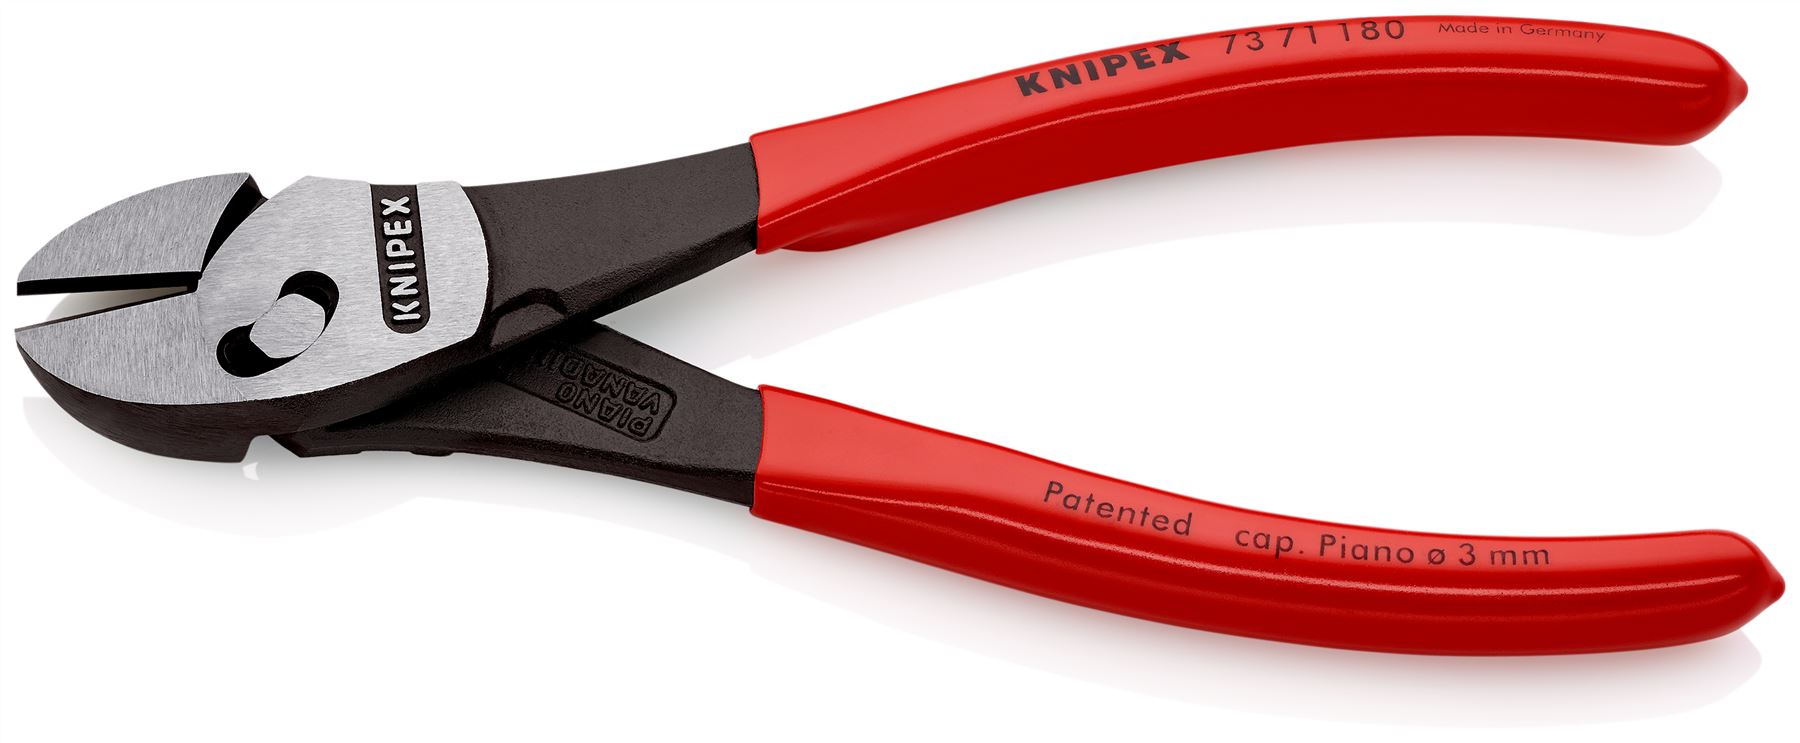 Knipex TwinForce High Performance Diagonal Cutters Cutting Pliers 180mm 73 71 180